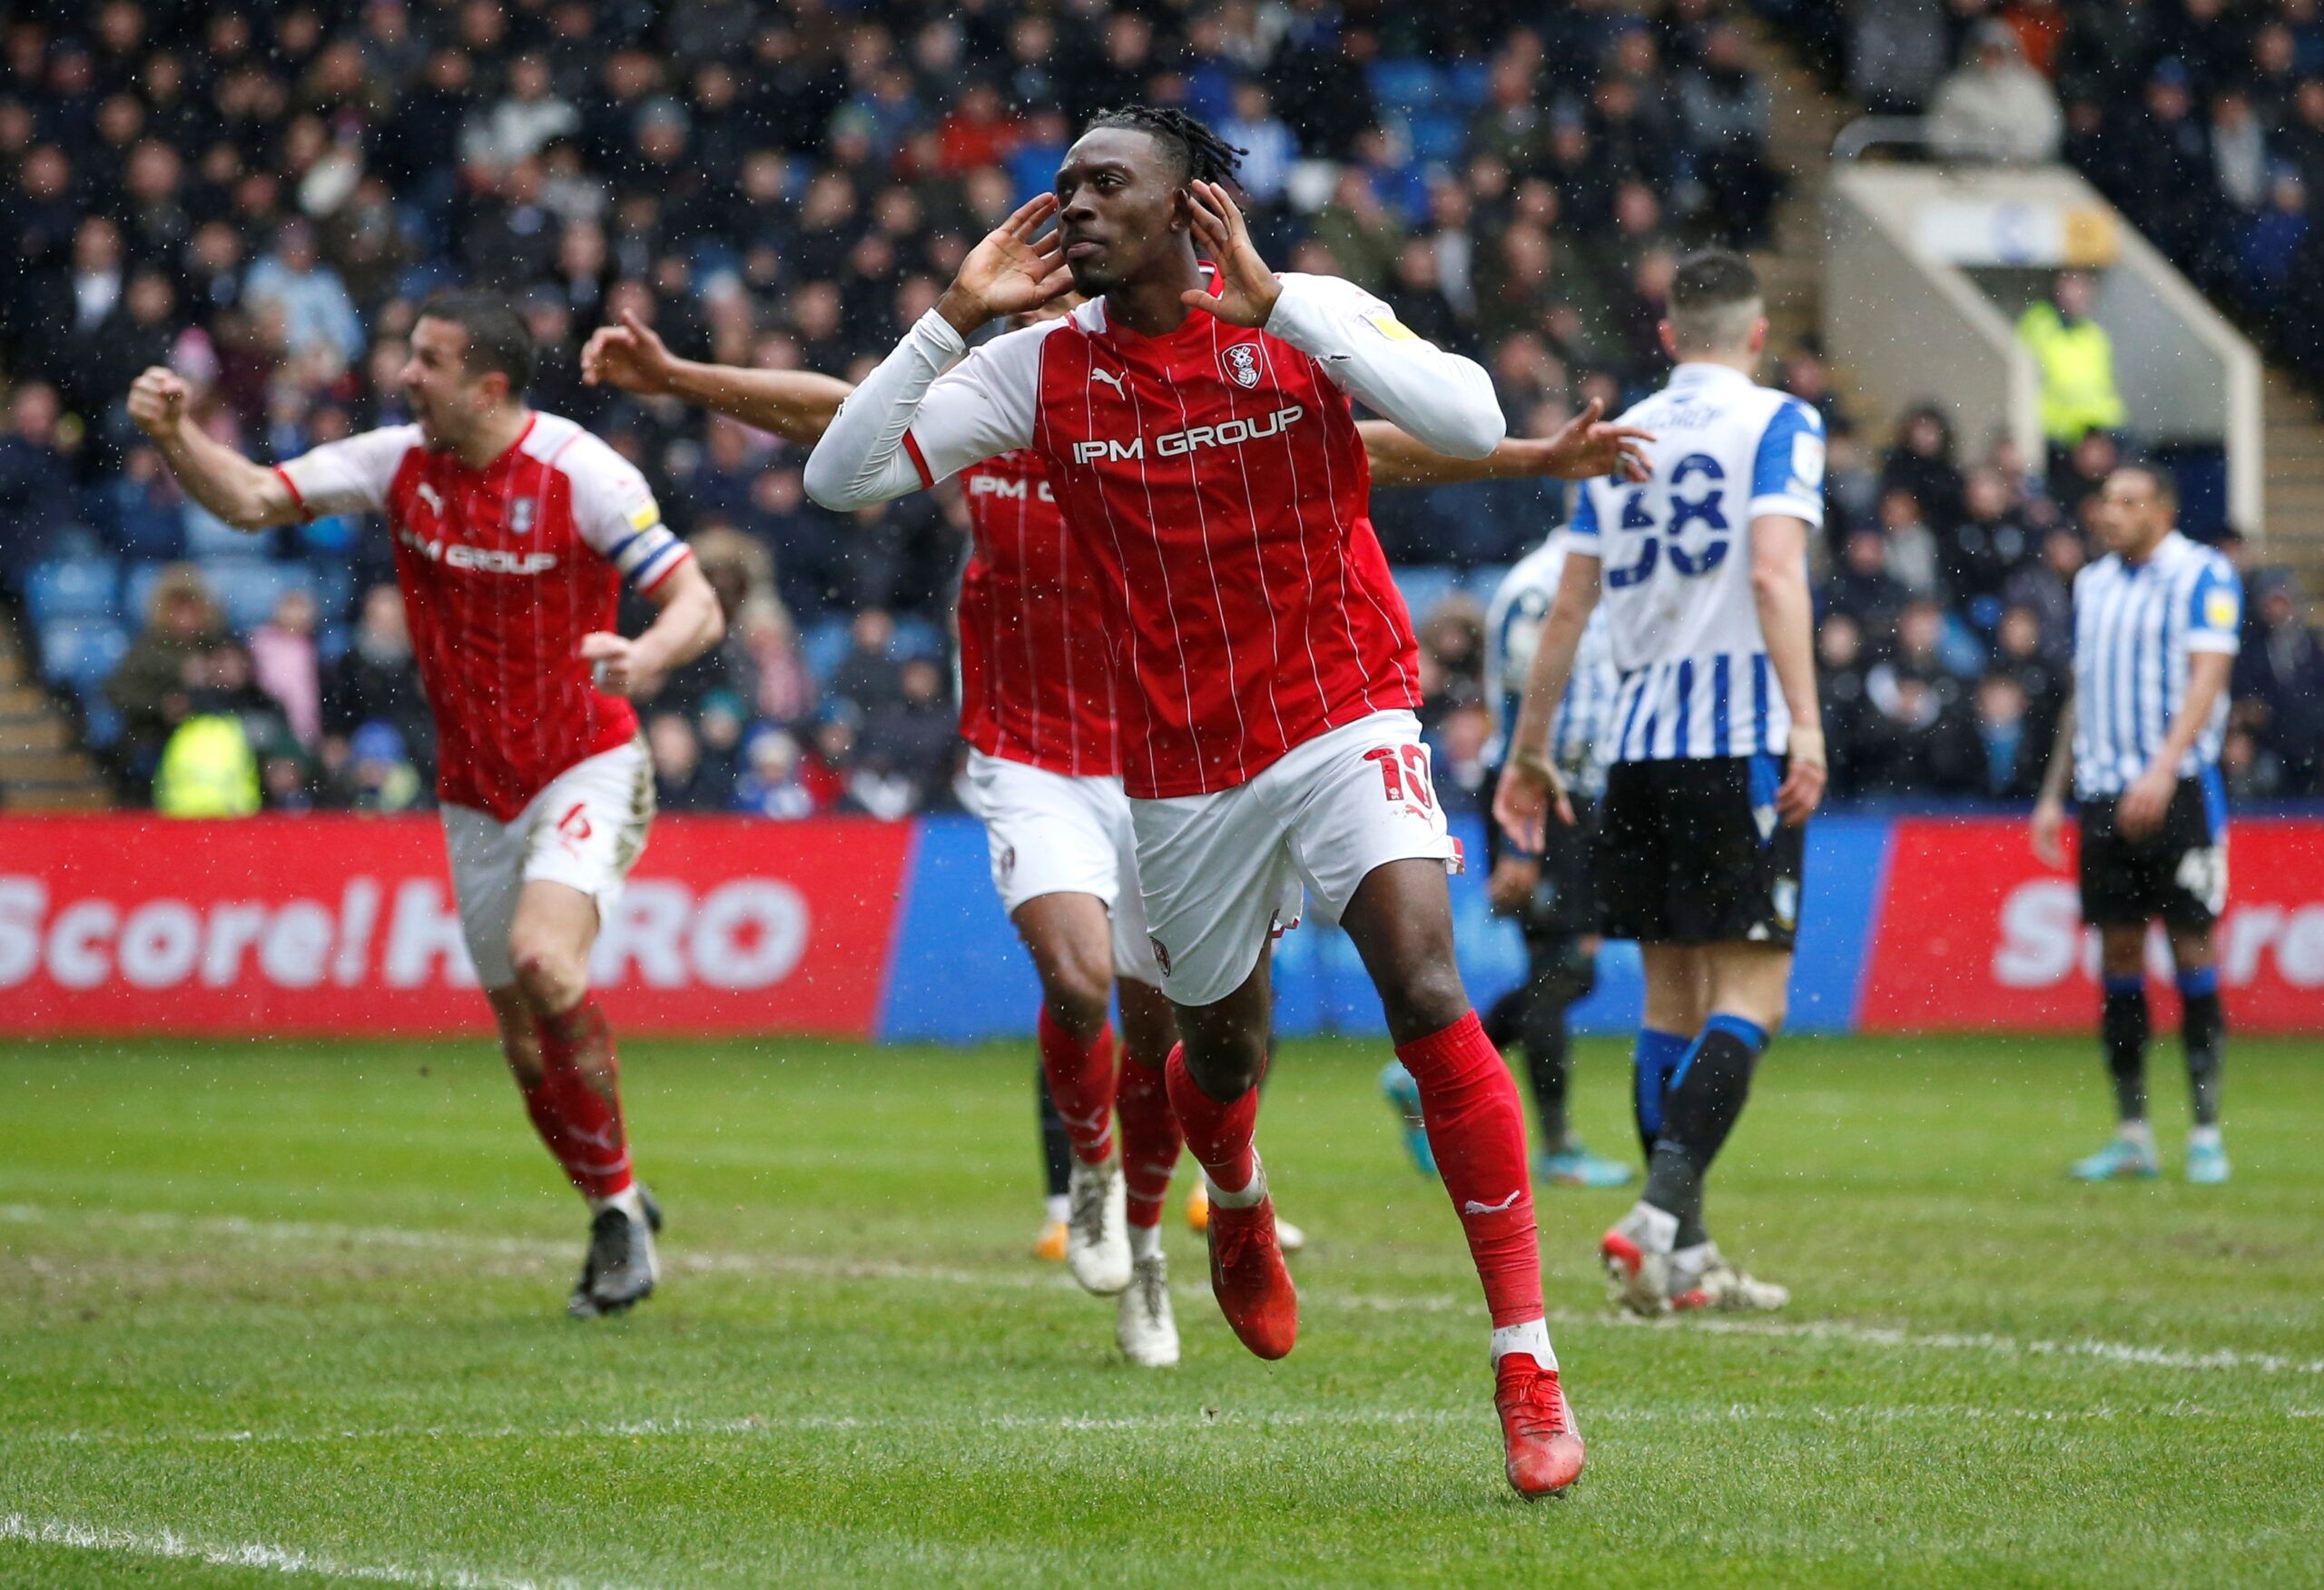 Soccer Football - League One - Sheffield Wednesday v Rotherham United - Hillsborough Stadium, Sheffield, Britain - February 13, 2022  Rotherham United's Freddie Ladapo celebrates scoring their first goal   Action Images/Ed Sykes  EDITORIAL USE ONLY. No use with unauthorized audio, video, data, fixture lists, club/league logos or 